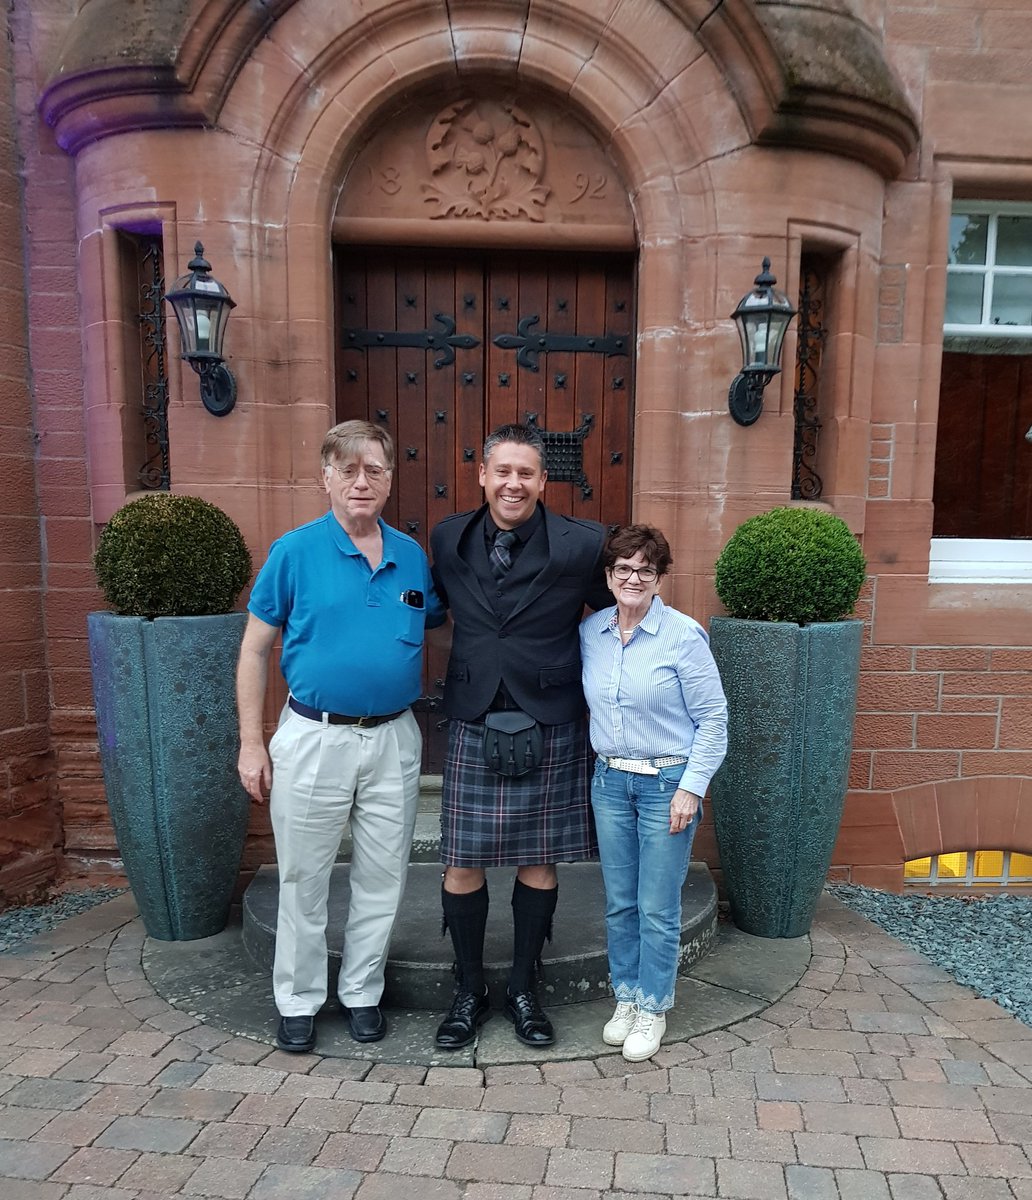 Our aim is LUXURY touring. Smiles all round at #fonabcastlehotel. Well done to the team - service, food, accom excellent. #luxuryscotland